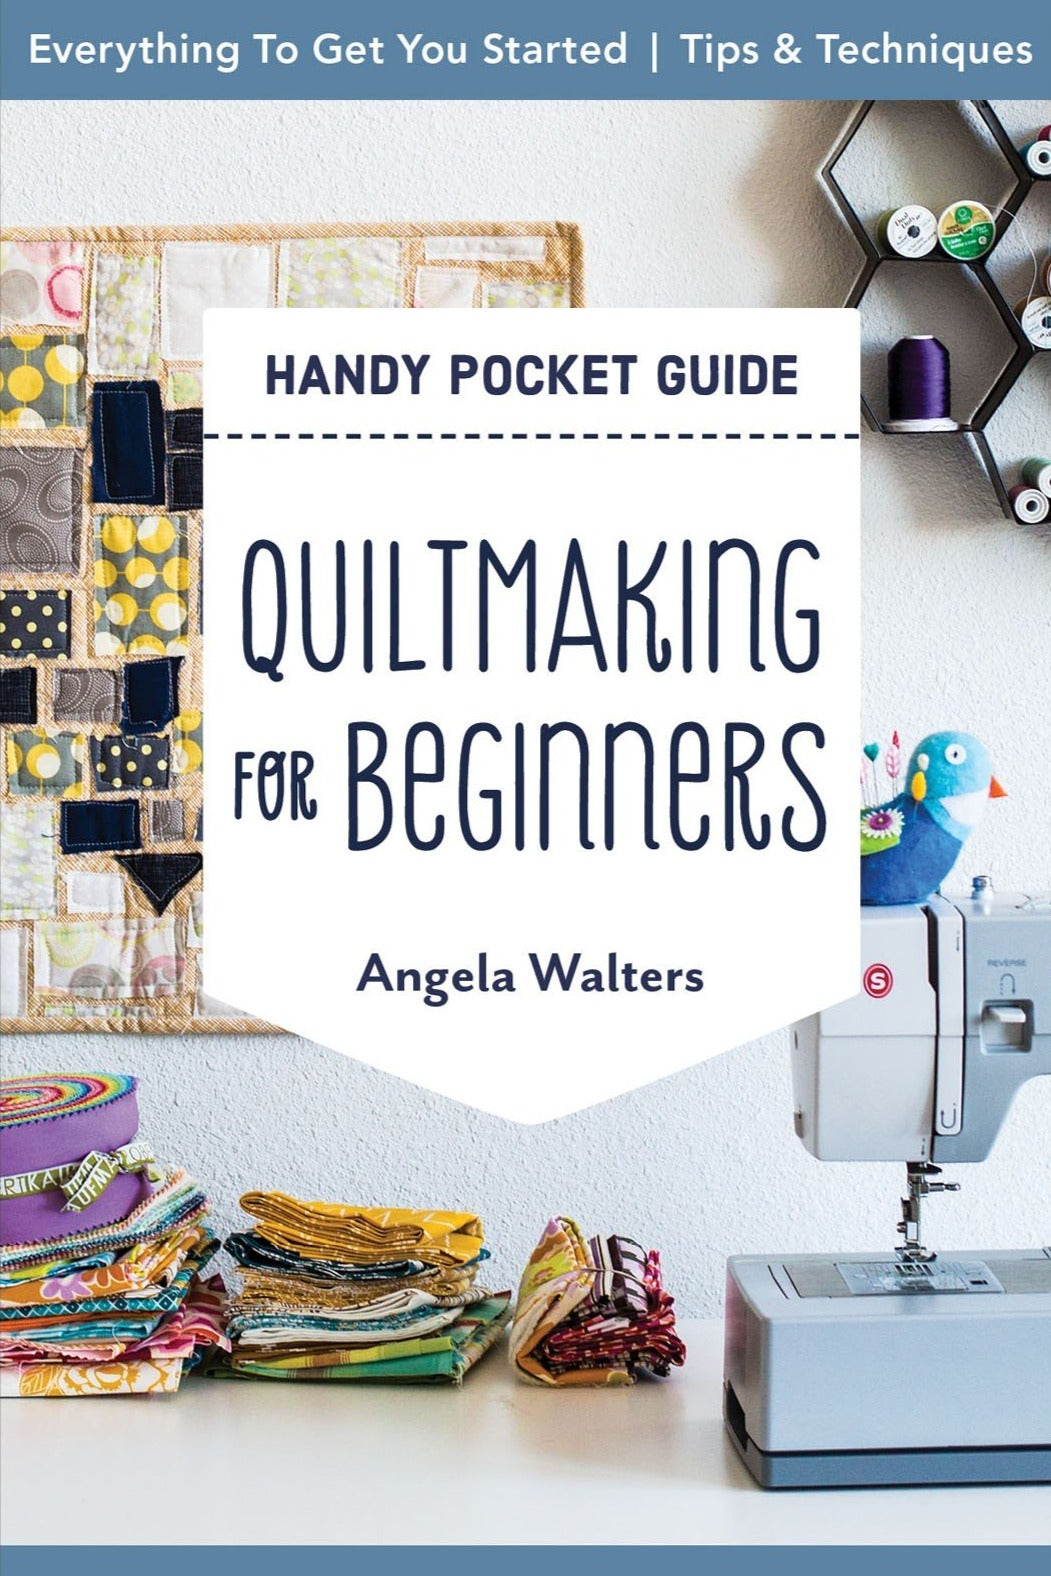 Pocket Guide | Quiltmaking for Beginners